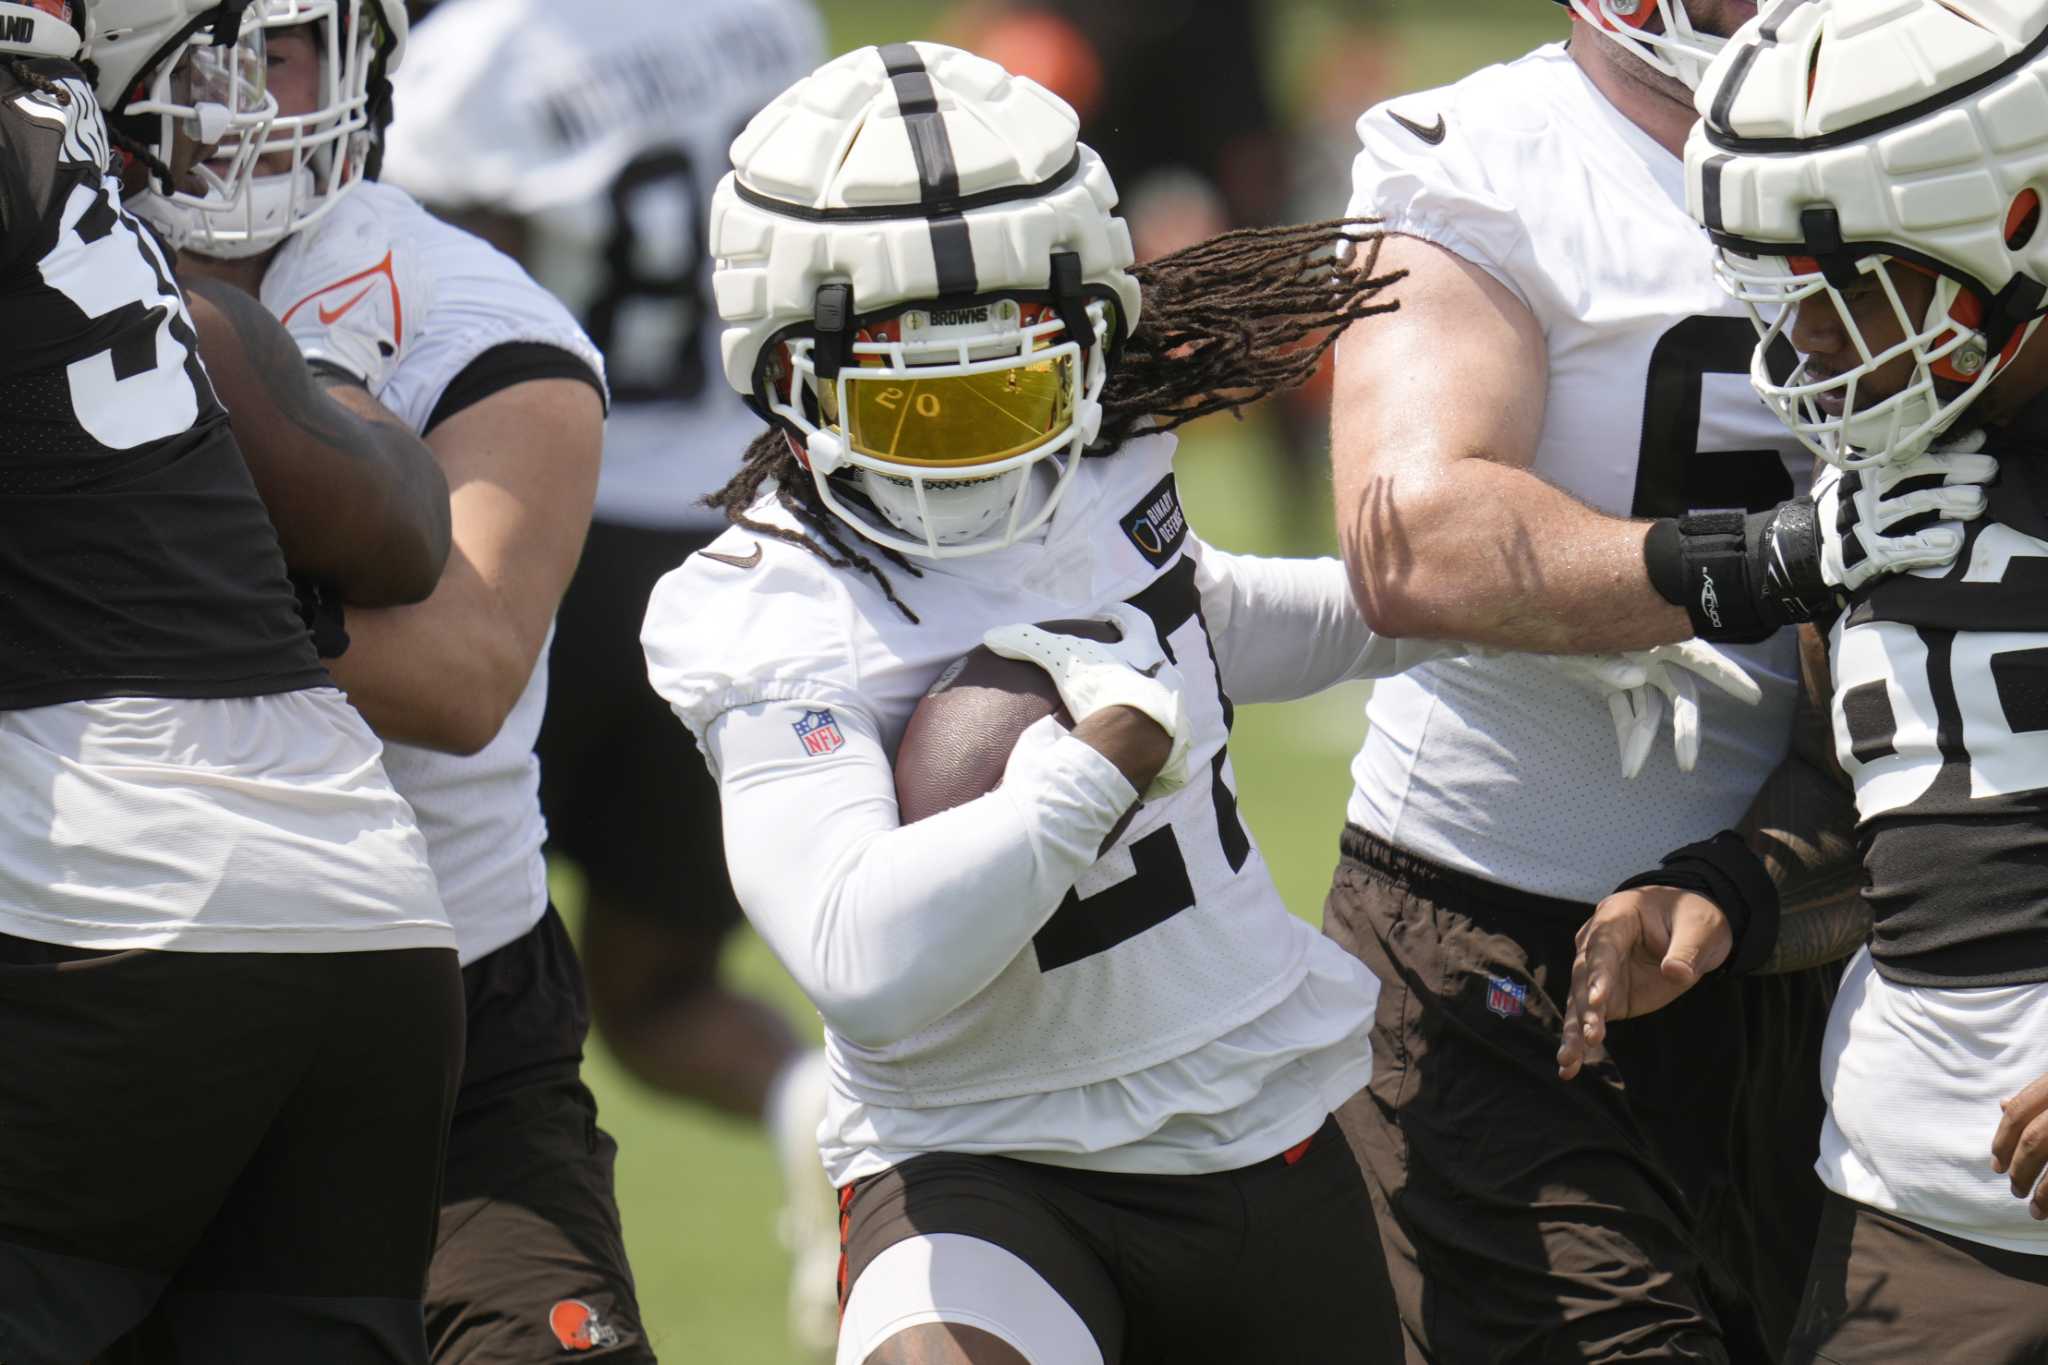 Browns RB D'Onta Foreman suffers head injury during practice, air lifted to hospital in Virginia